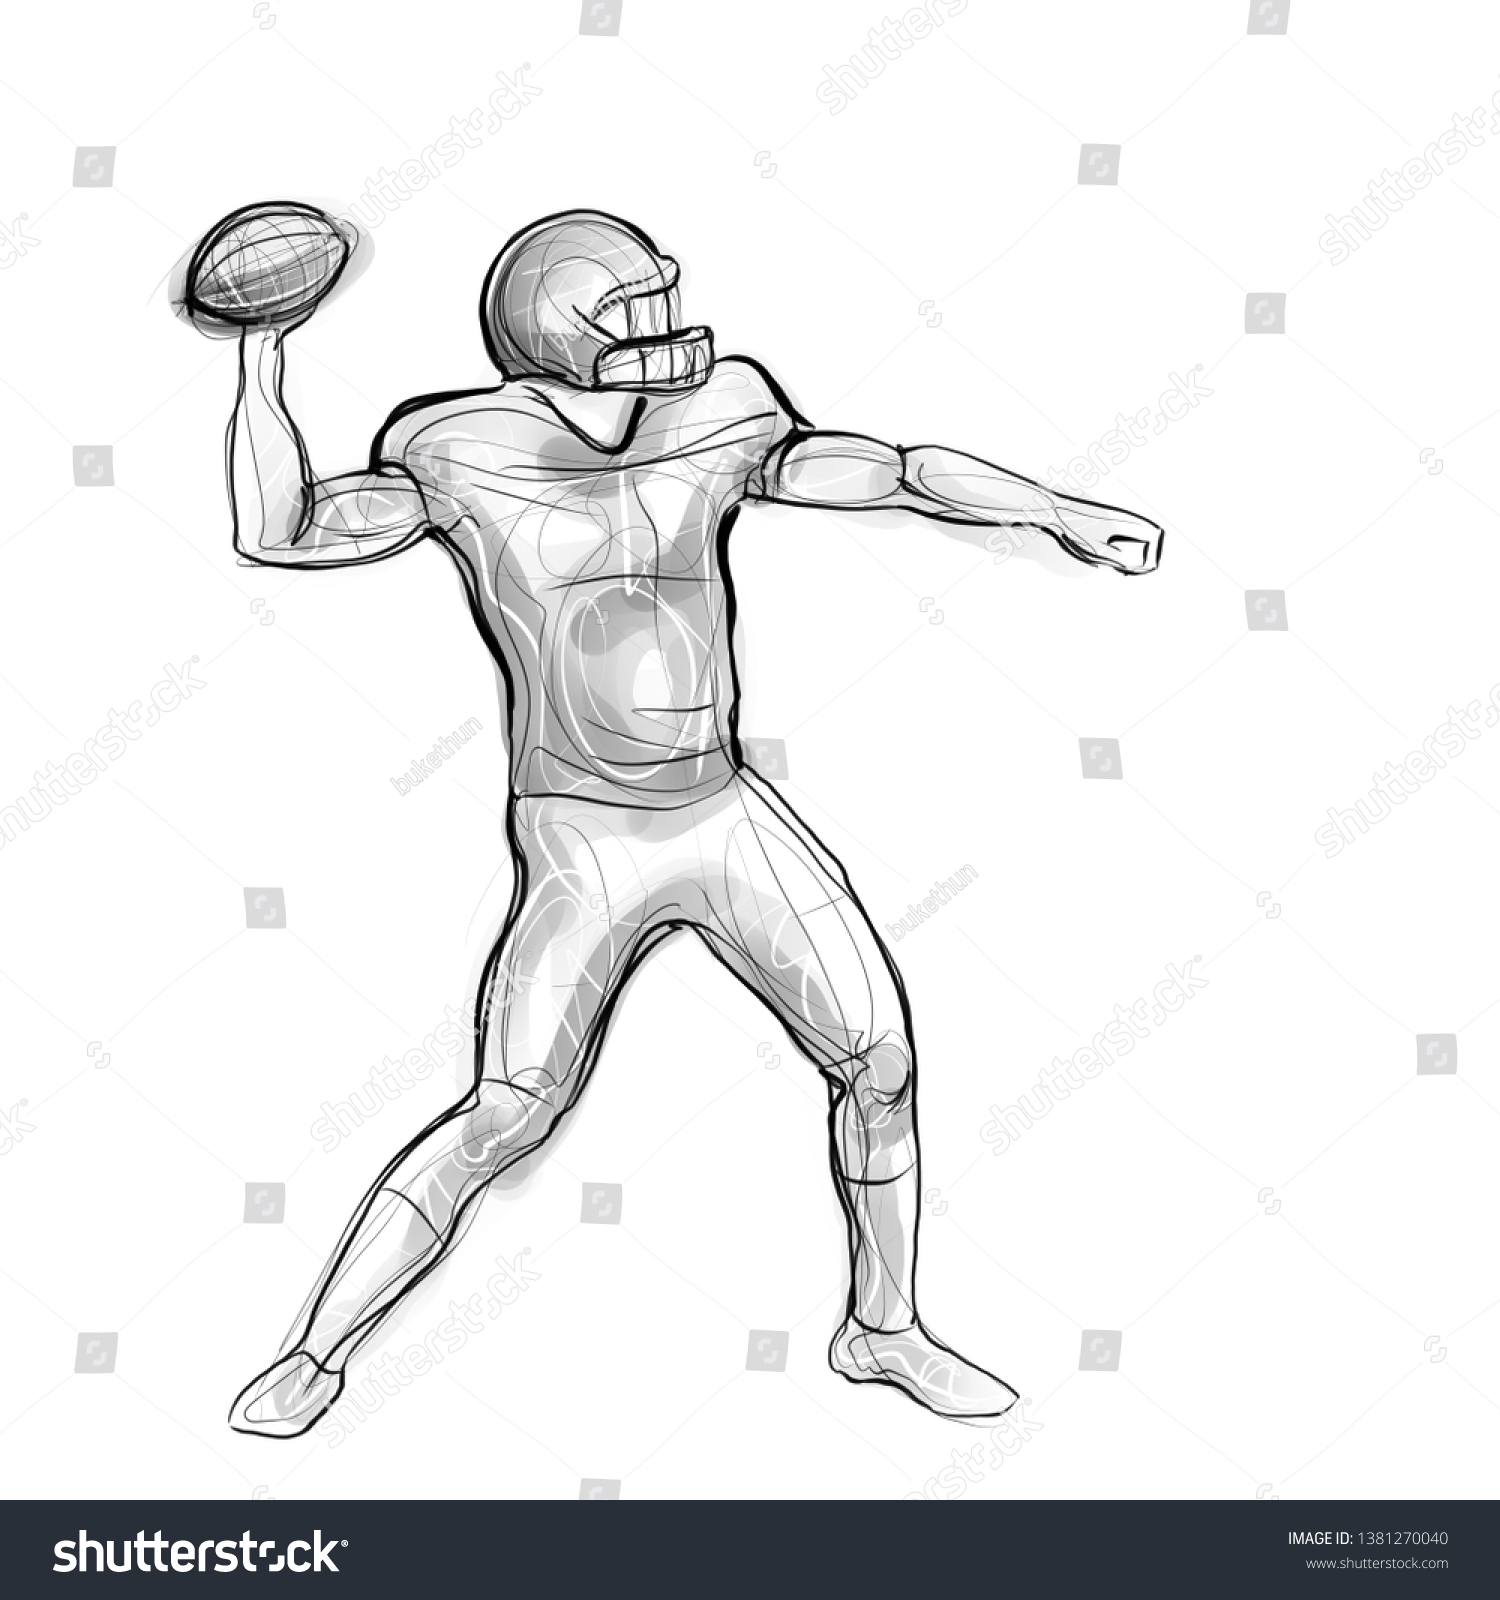 Creative American Football Sketches Drawings with Realistic